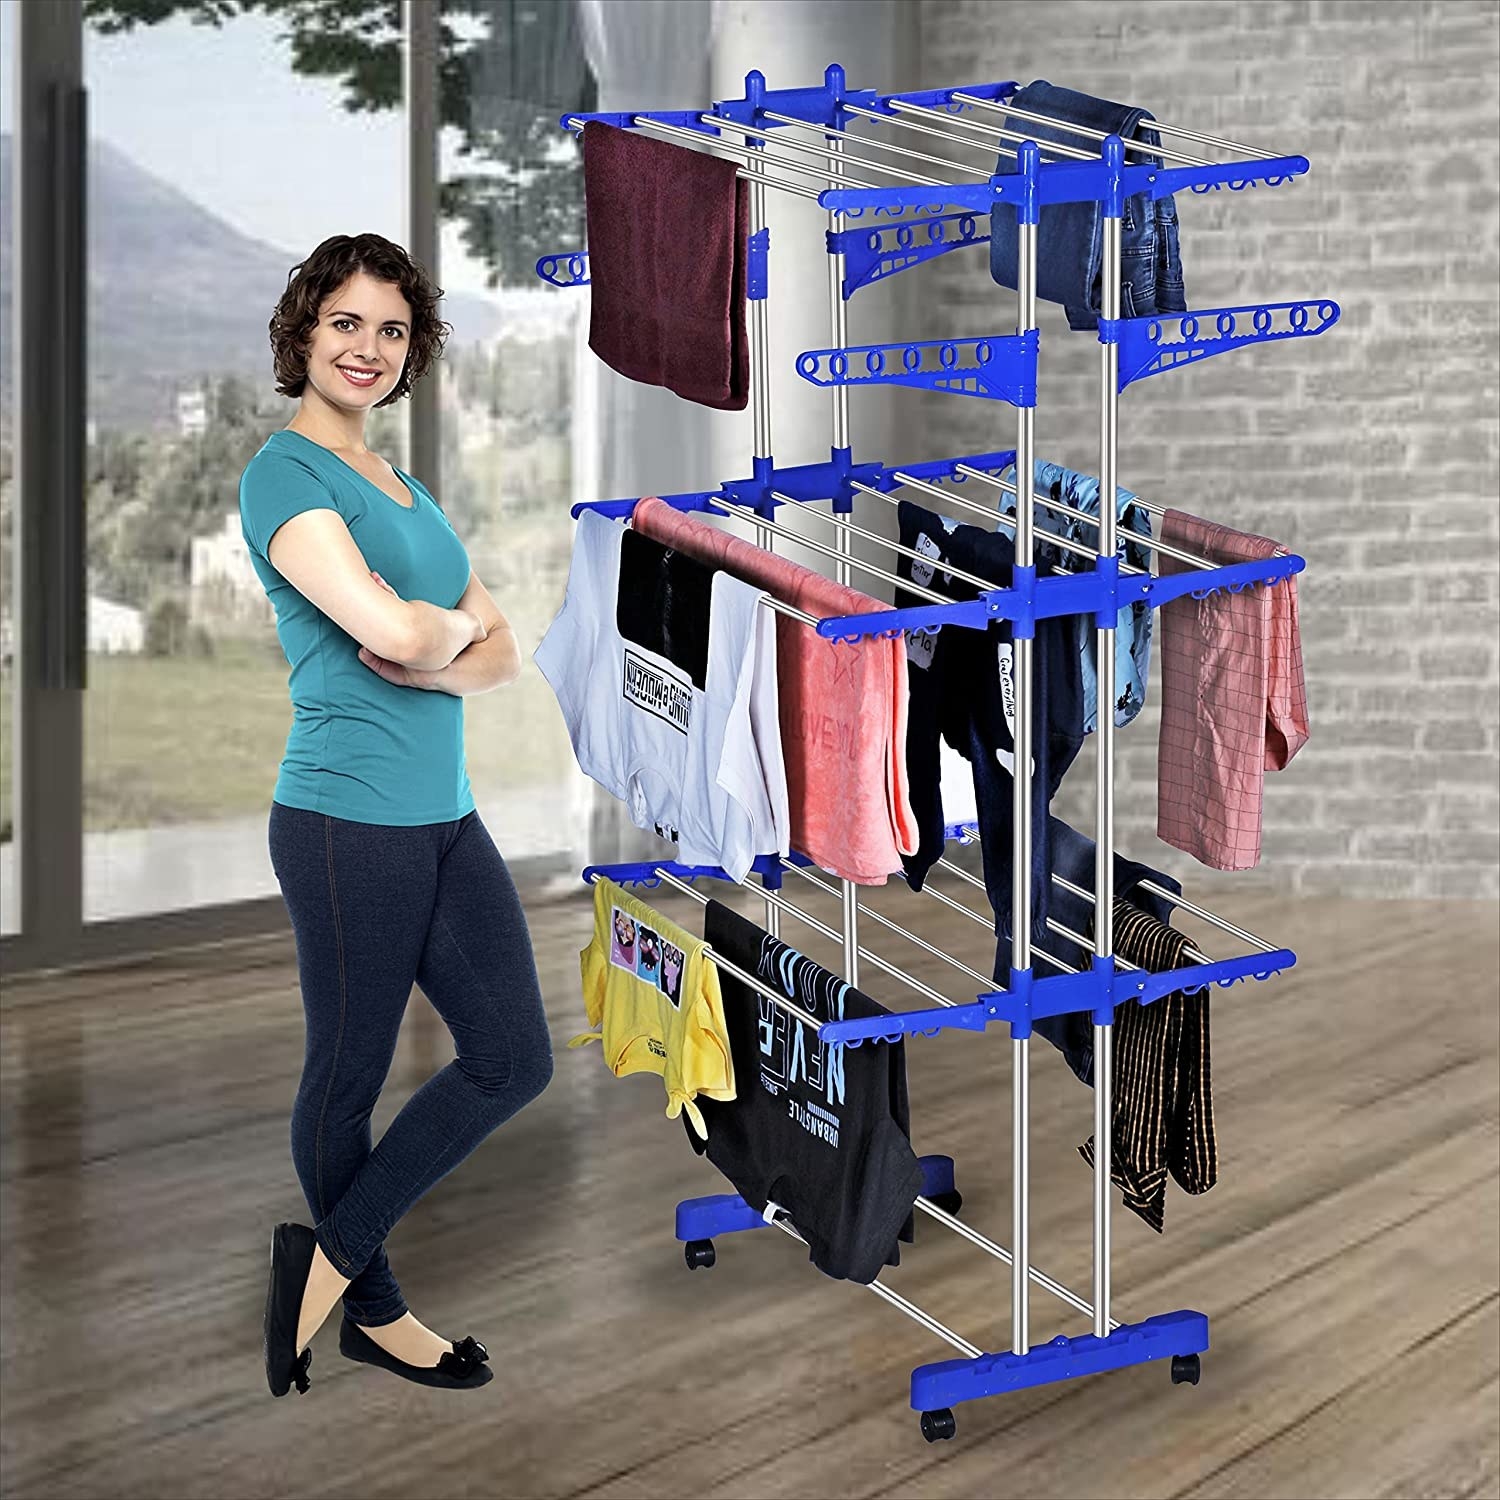 A woman in a room, standing next to a clothes drying stand with clean laundry on it